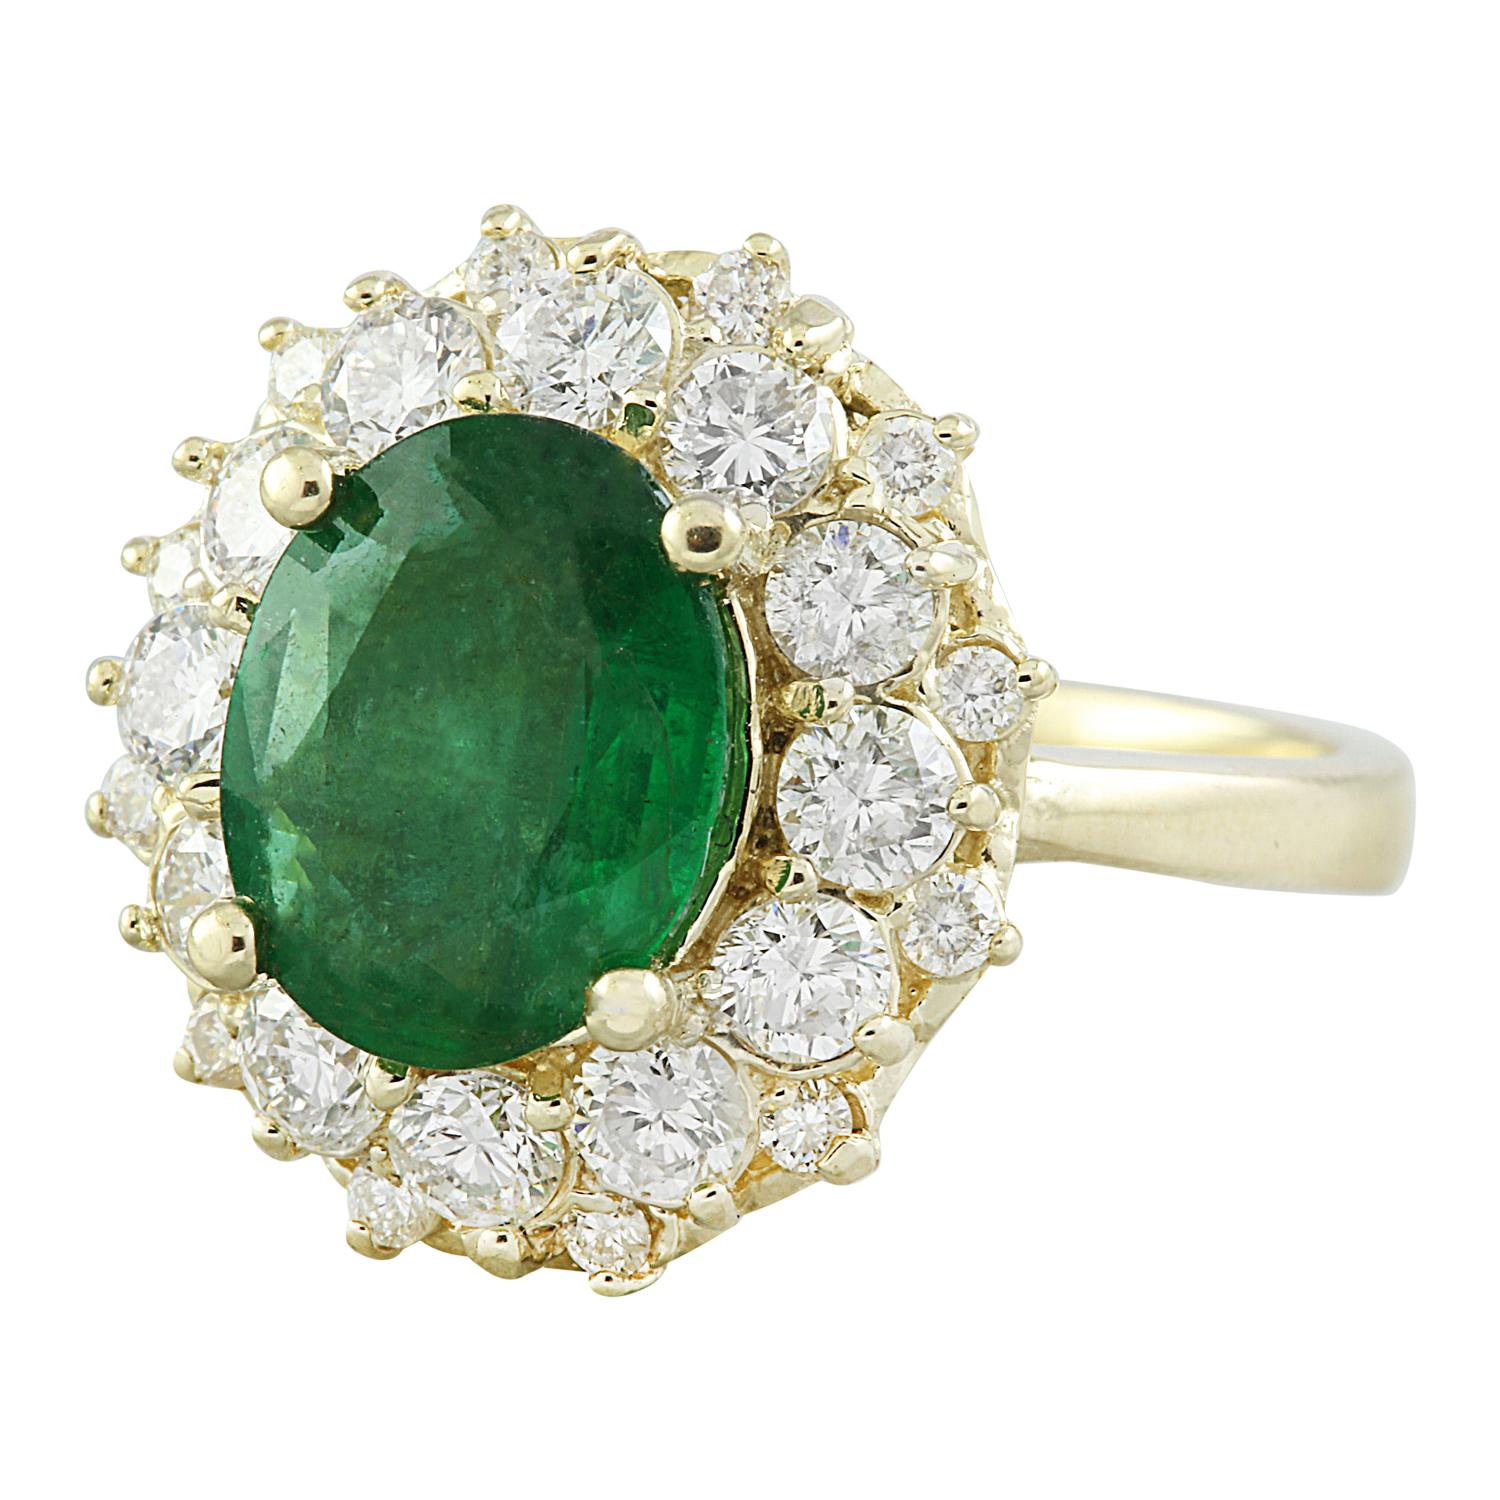 Introducing our magnificent 3.16 Carat Natural Emerald Ring, expertly crafted in stunning 14 Karat Solid Yellow Gold. Authenticated with a stamped mark of 14K, this remarkable ring weighs a total of 4.8 grams, ensuring both grace and durability. At